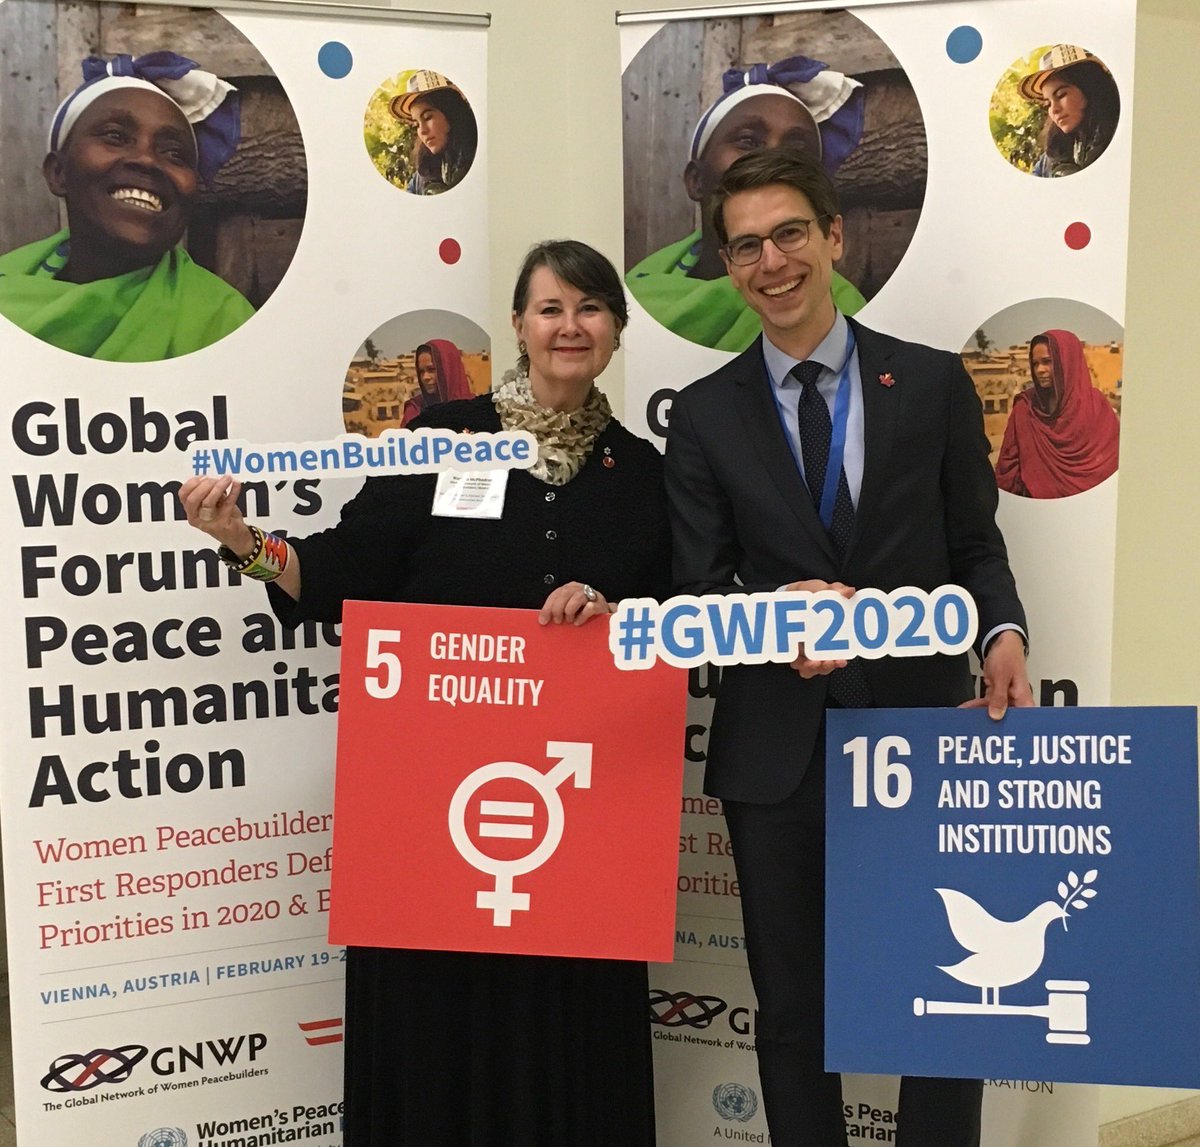 A quick “Canada” moment with the great ⁦@SenMarilou⁩ during Global Women’s Forum #womenbuildpeace #gwf2020 ⁦@WomenPeaceSec⁩ ⁦@wphfund⁩ ⁦@GNWP_GNWP⁩